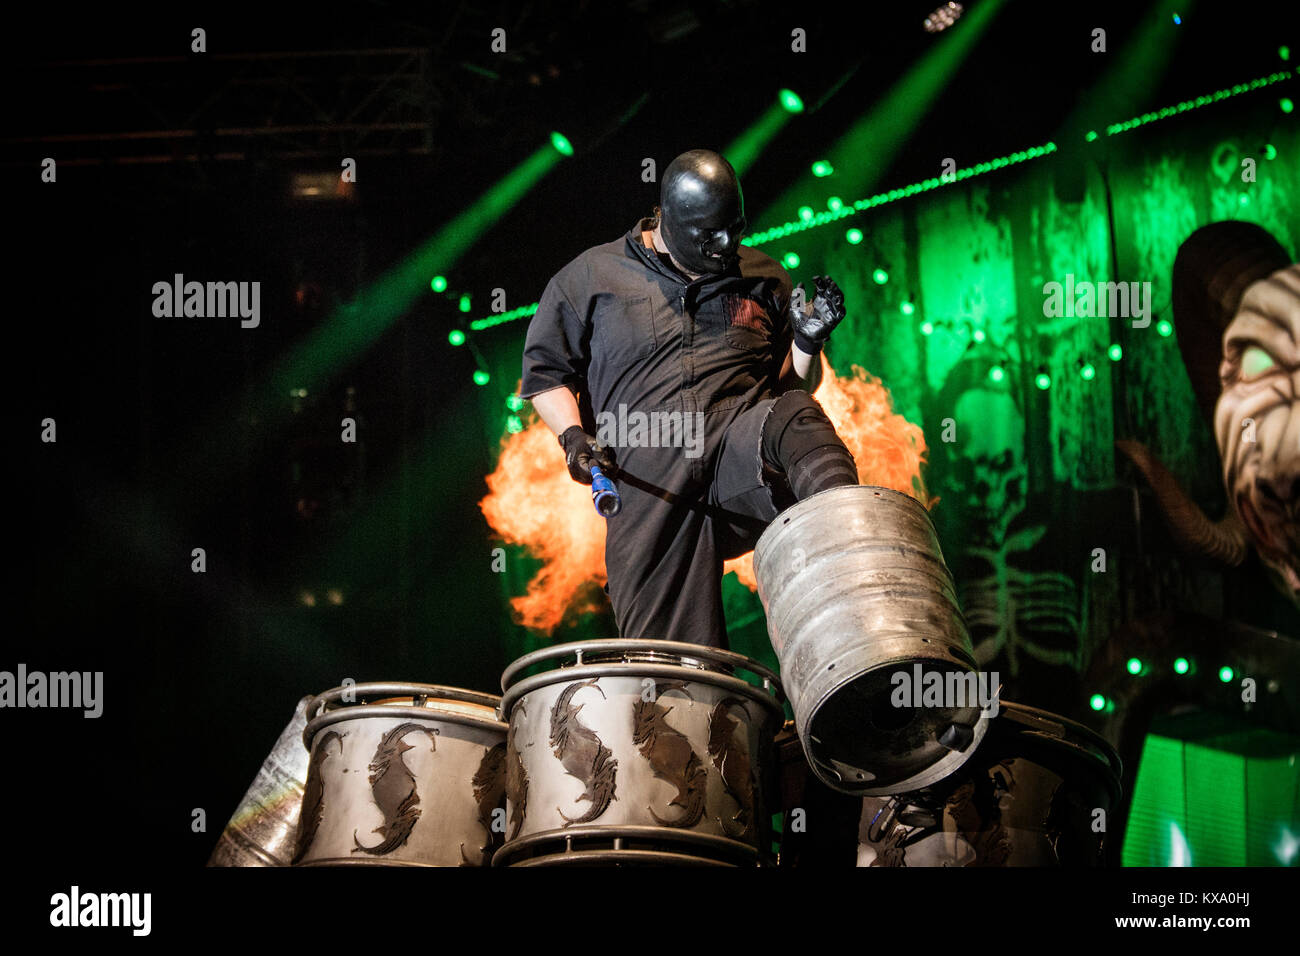 The American heavy metal band Slipknot performs a live concert at ...